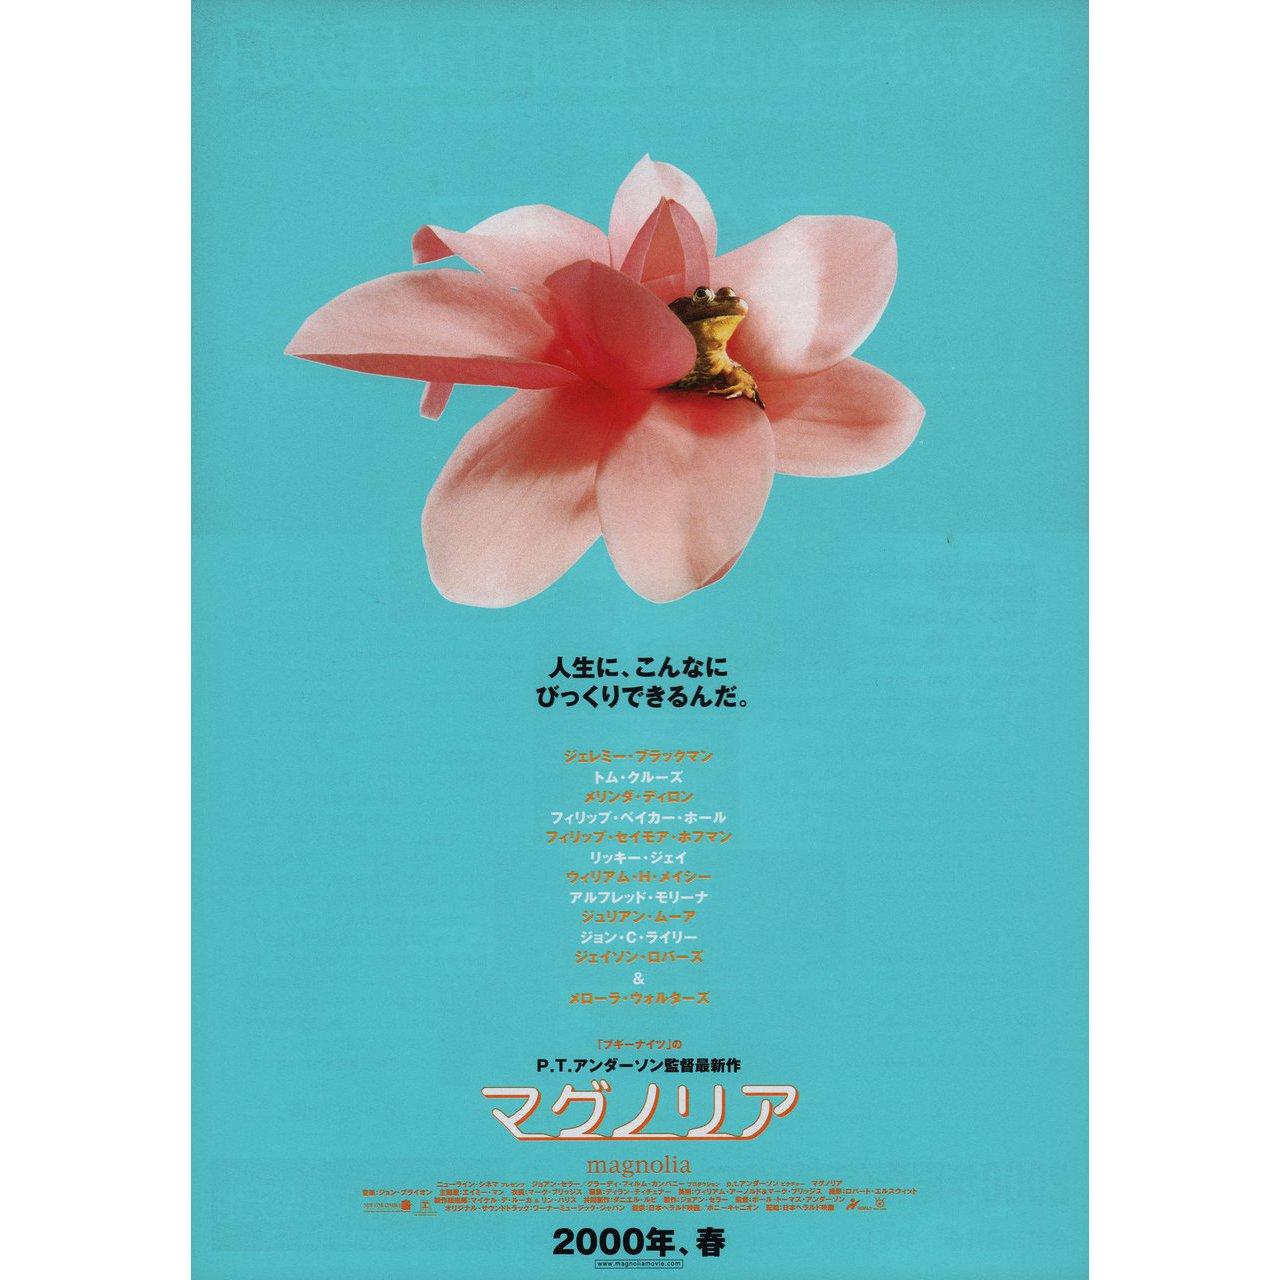 Original 1999 Japanese B5 chirashi flyer for the film “Magnolia” directed by Paul Thomas Anderson with Julianne Moore / William H. Macy / John C. Reilly / Tom Cruise. Fine condition, rolled. Please note: the size is stated in inches and the actual